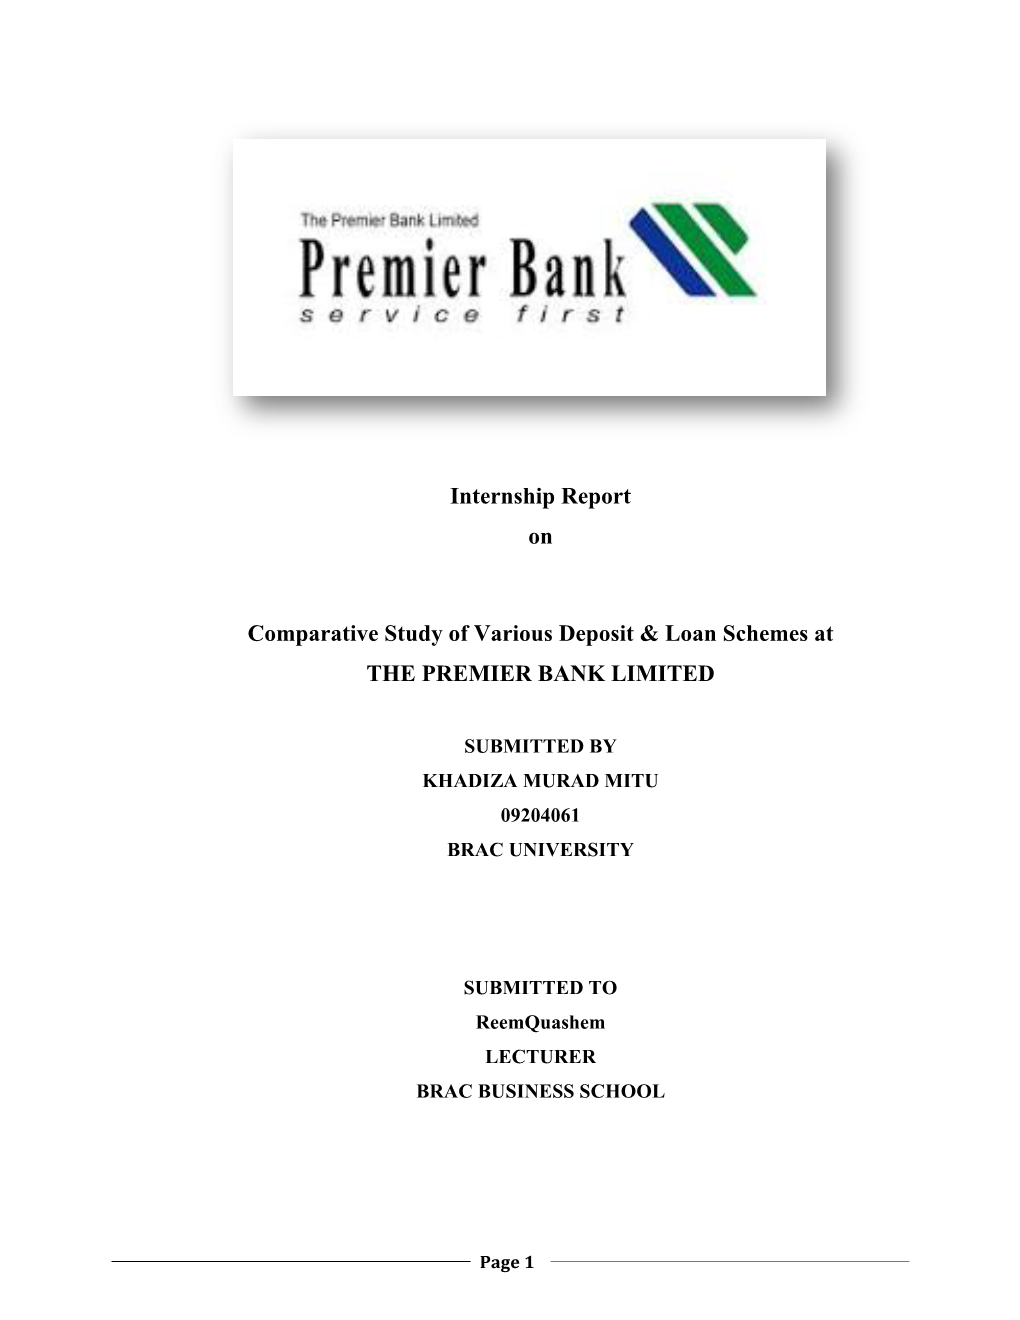 The Preimer Bank Limited